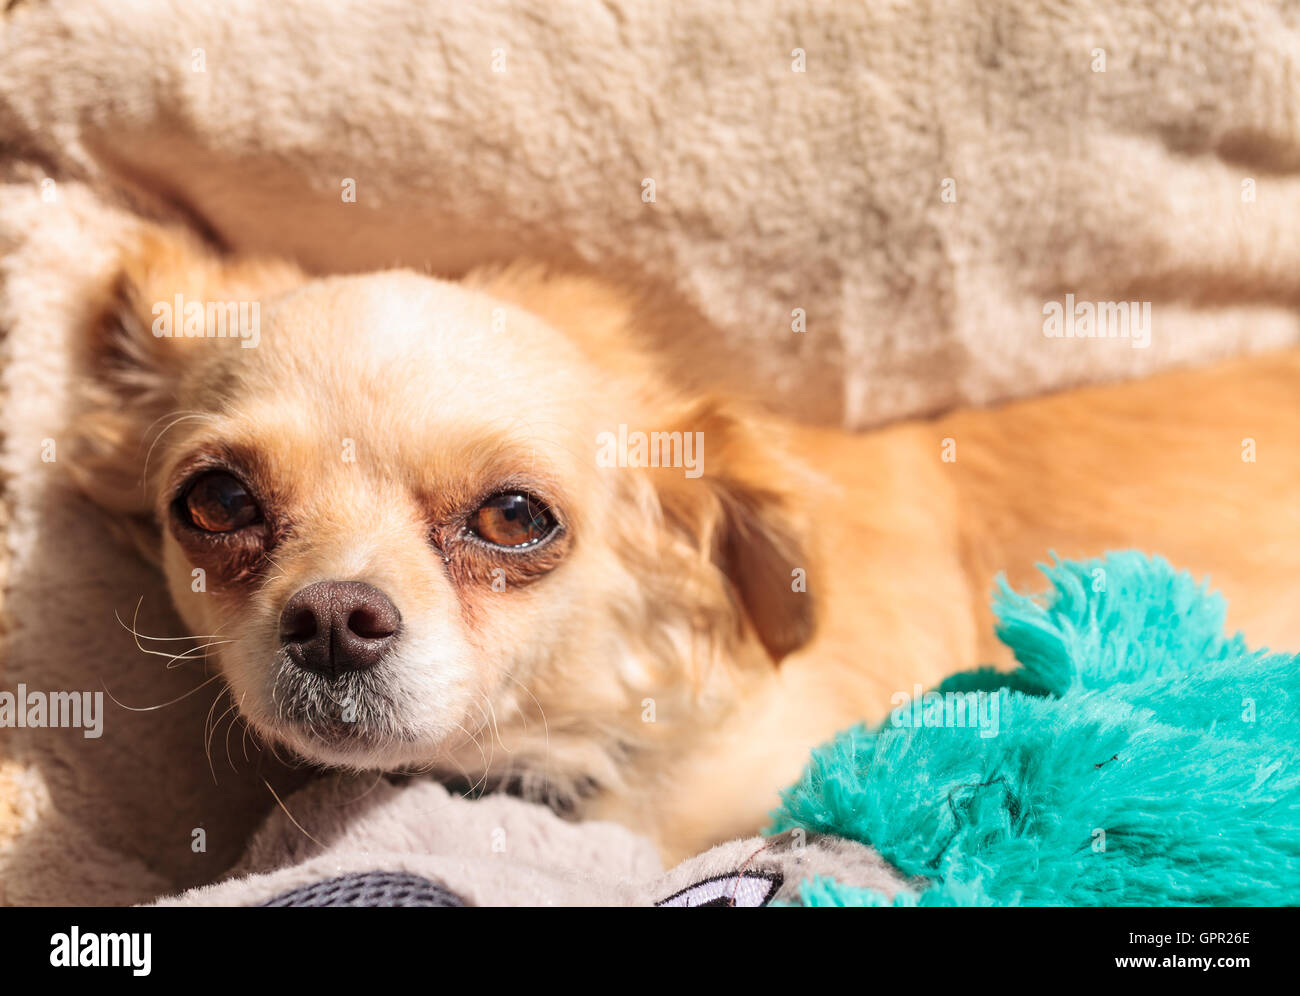 Small blond Chihuahua puppy dog in a comfortable bed Stock Photo